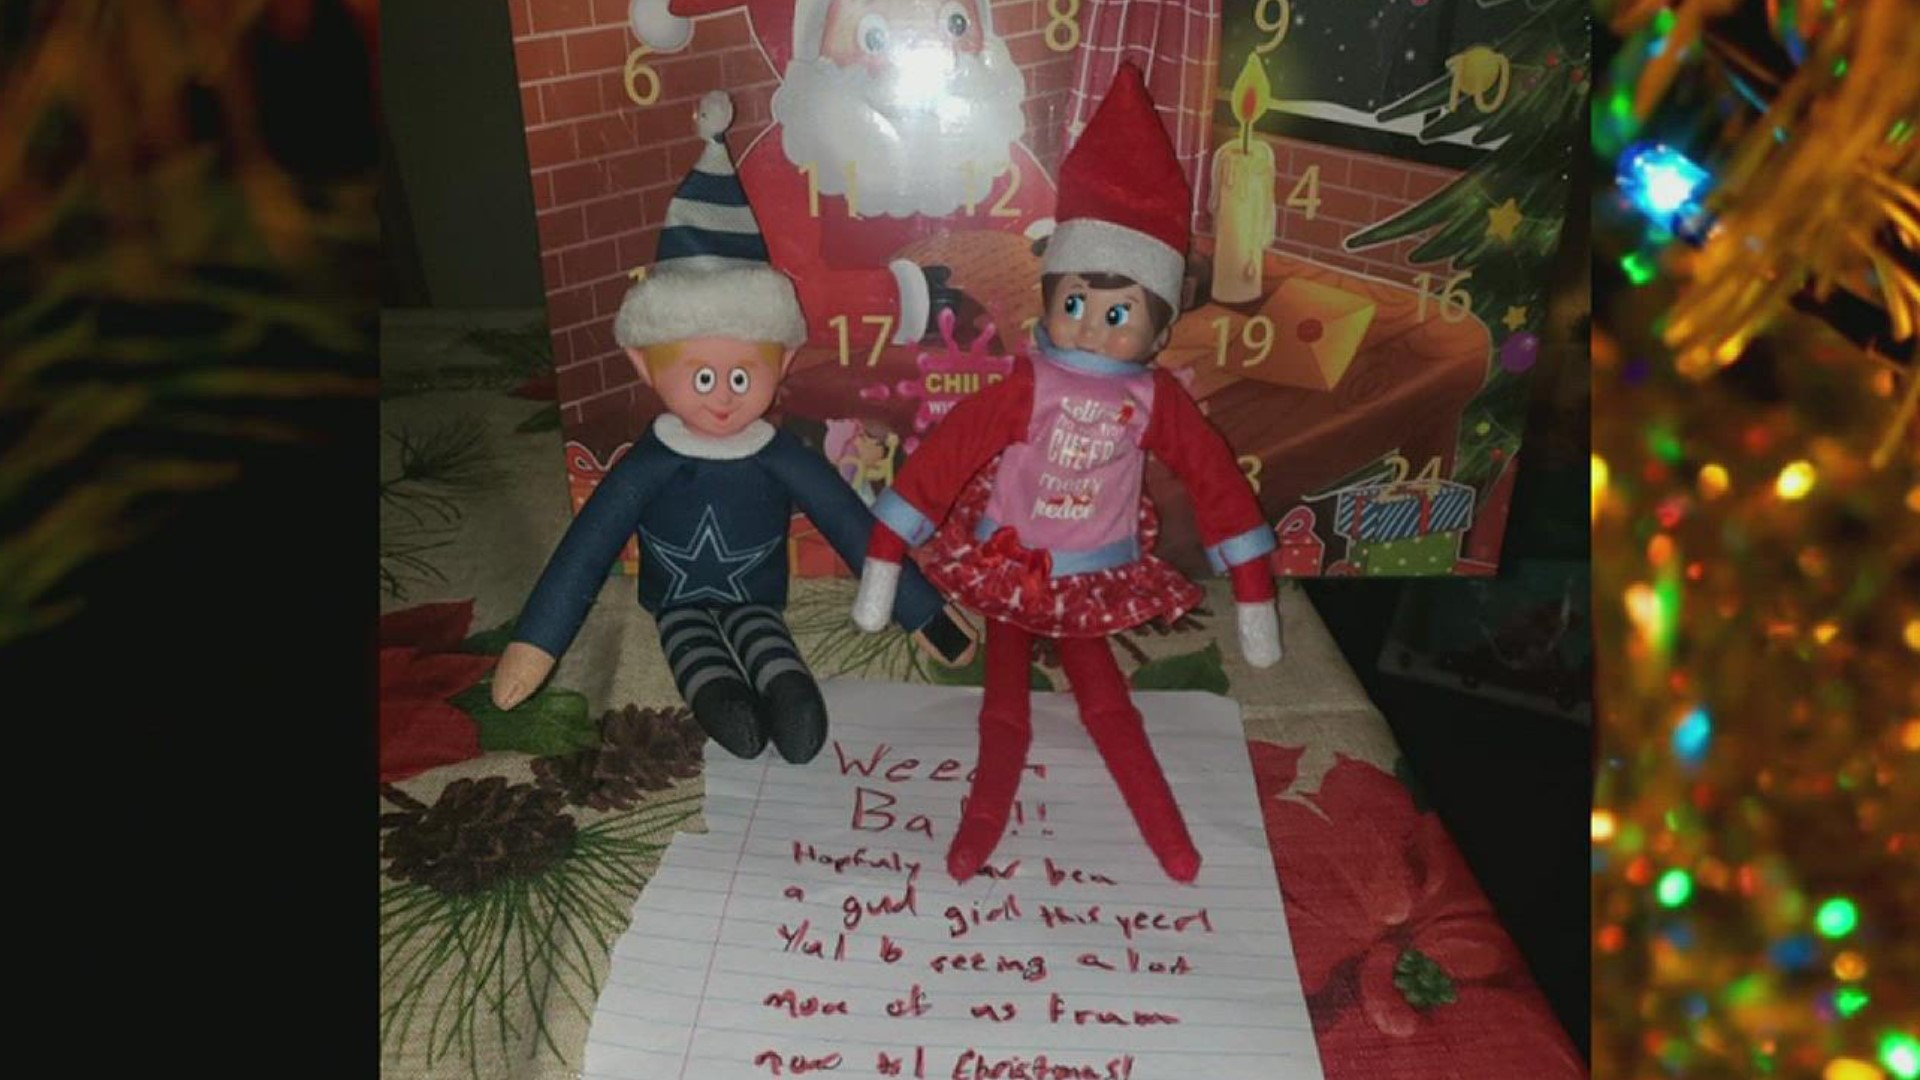 Elf on a Shelf from our local viewers!